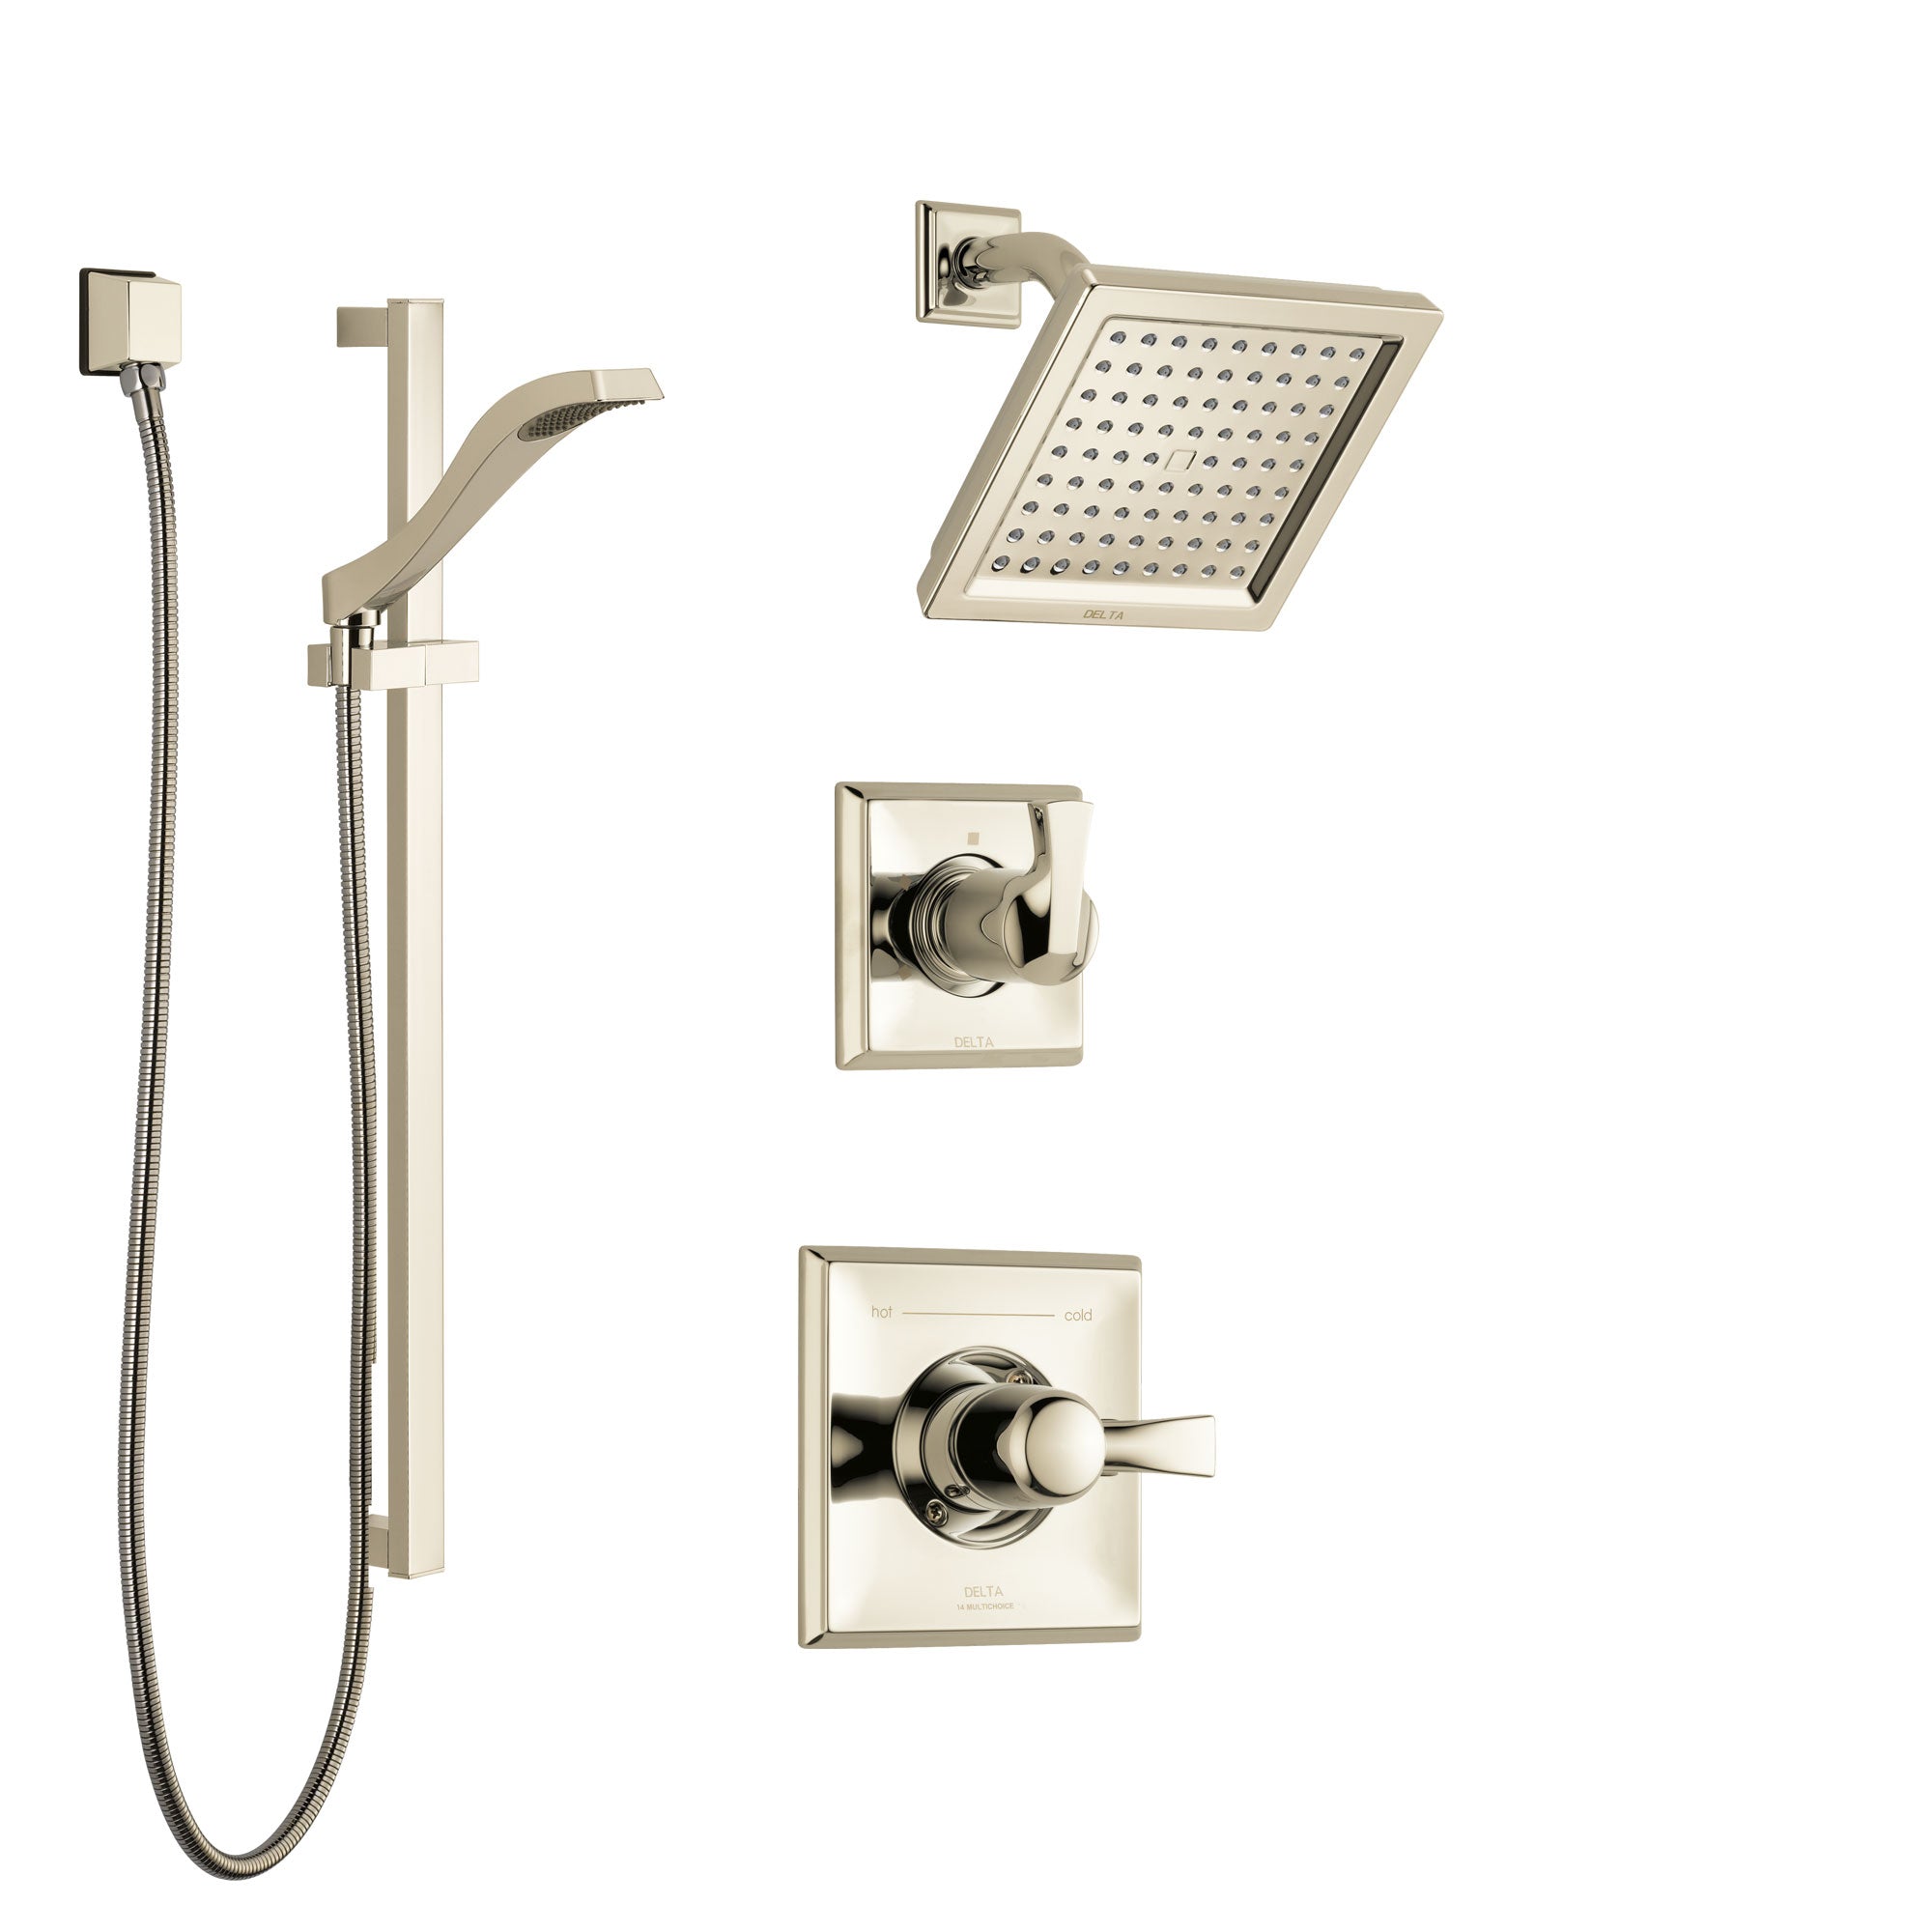 Delta Dryden Polished Nickel Finish Shower System with Control Handle, 3-Setting Diverter, Showerhead, and Hand Shower with Slidebar SS142511PN2